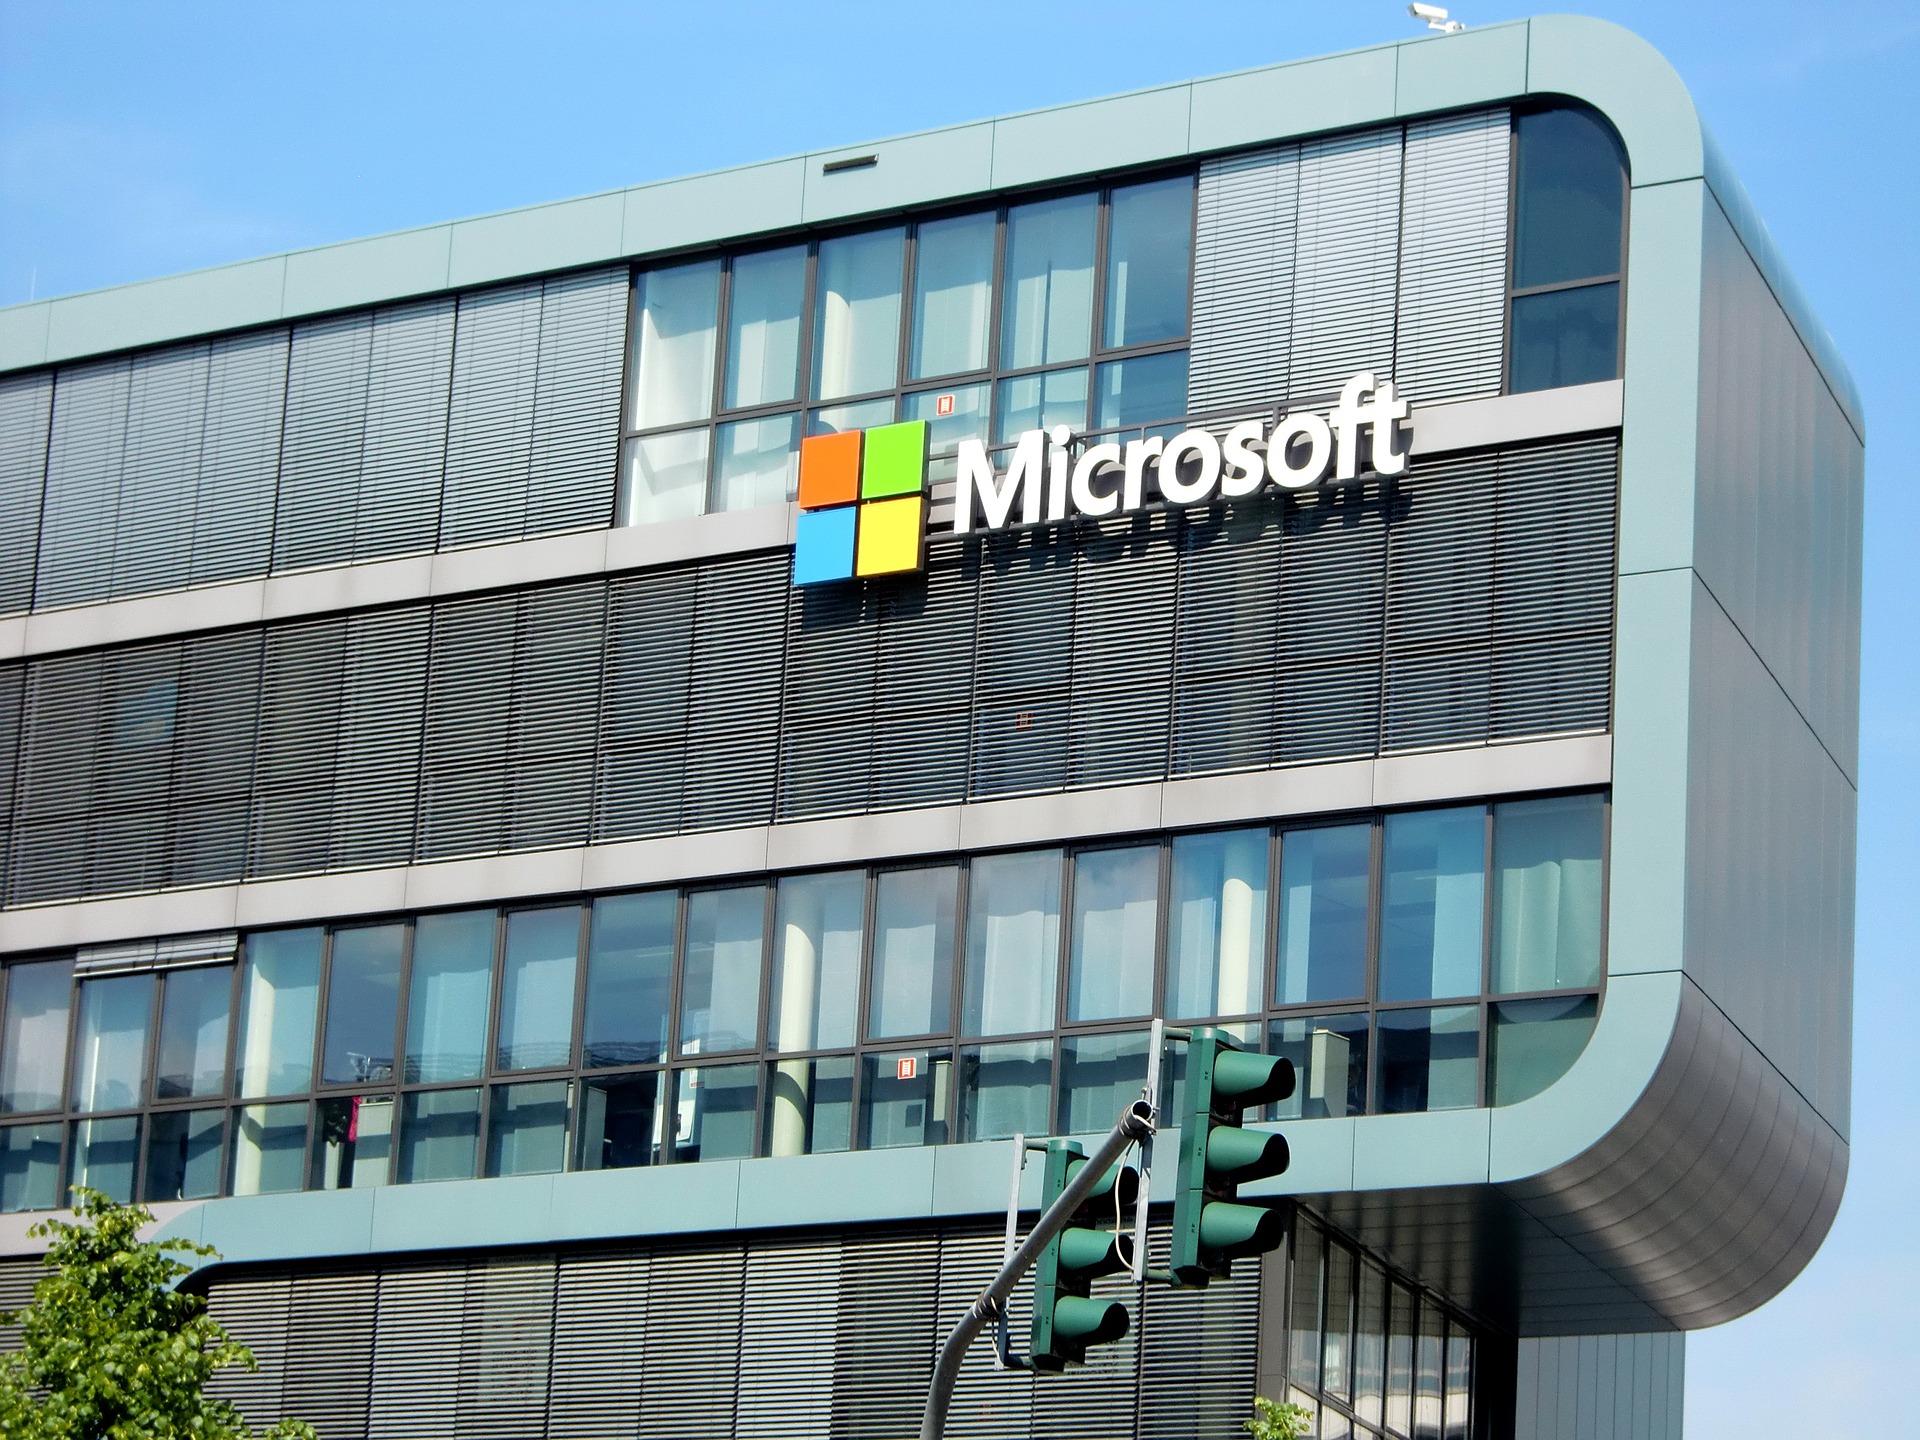 A large glass building with "Microsoft" on the side of it